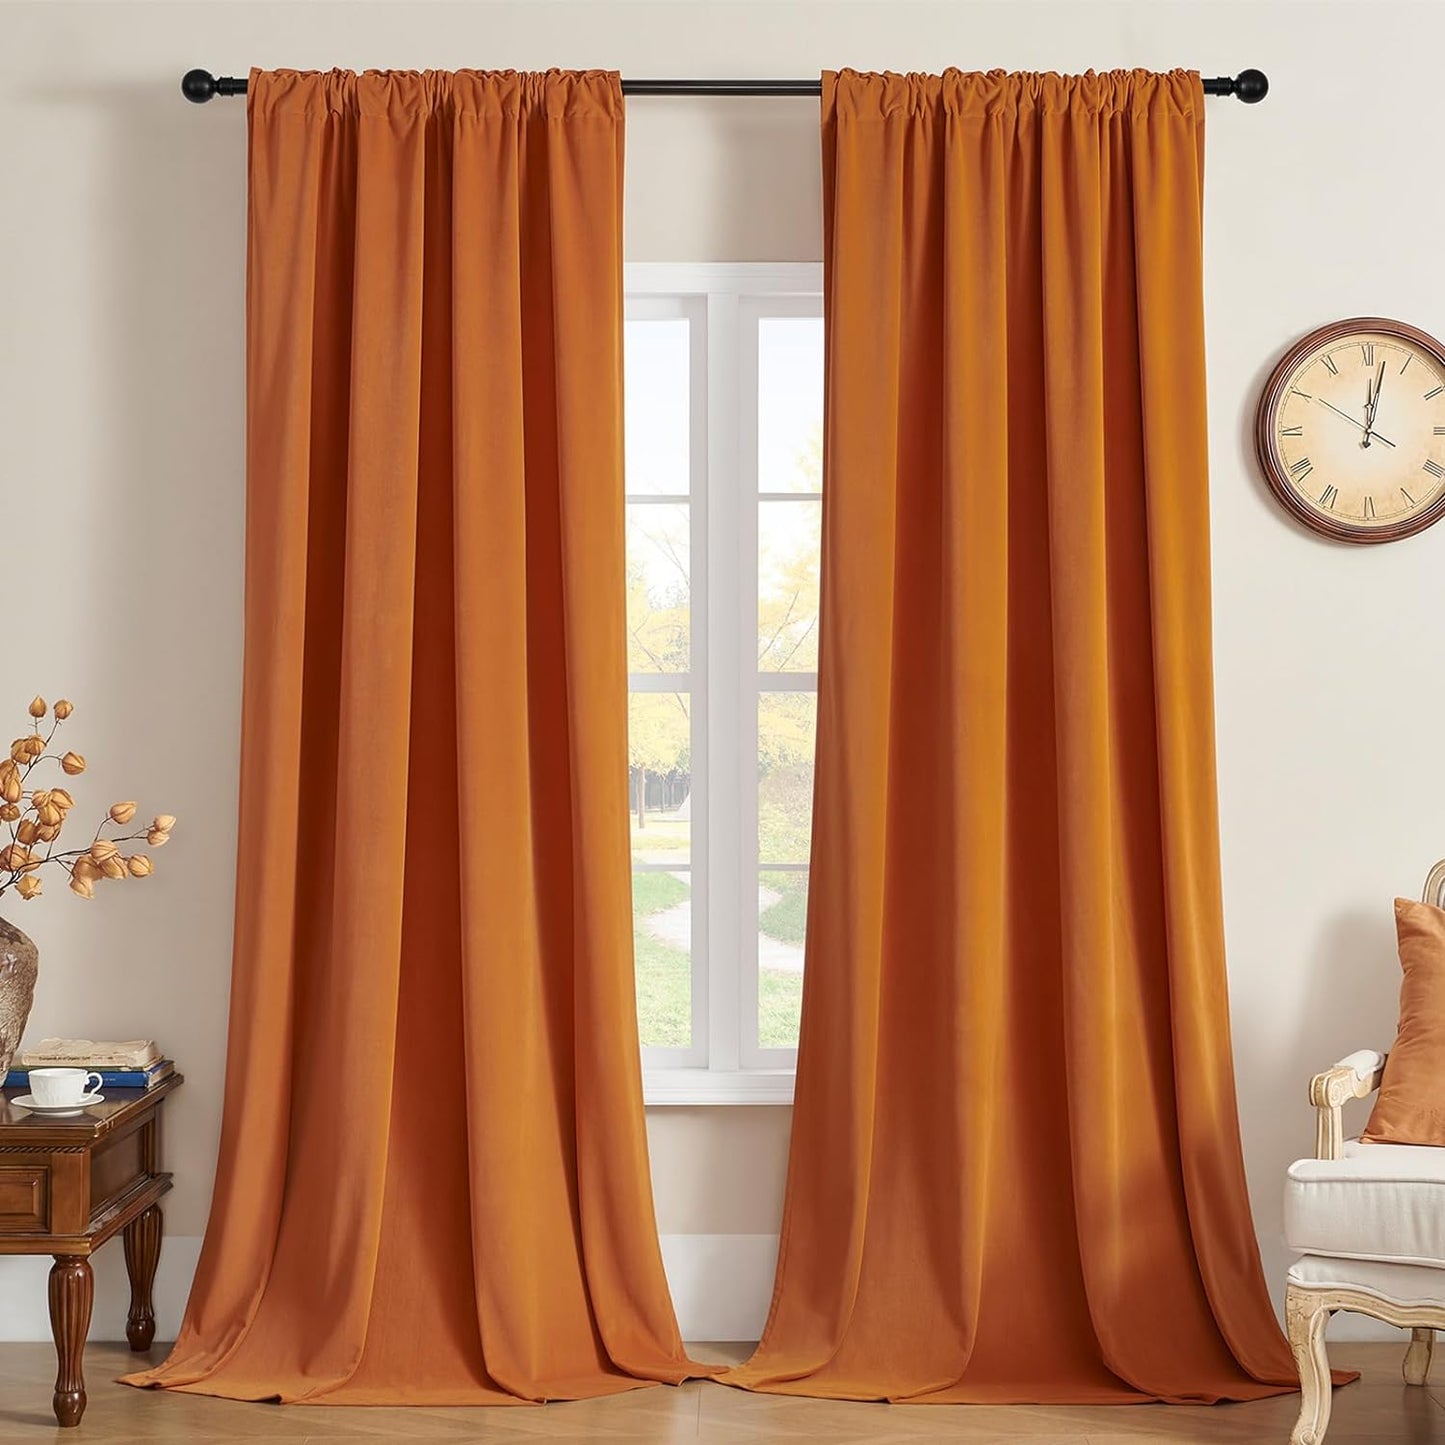 Joydeco Black Velvet Curtains 90 Inch Length 2 Panels, Luxury Blackout Rod Pocket Thermal Insulated Window Curtains, Super Soft Room Darkening Drapes for Living Dining Room Bedroom,W52 X L90 Inches  Joydeco Rod Pocket | Orange 52W X 72L Inch X 2 Panels 